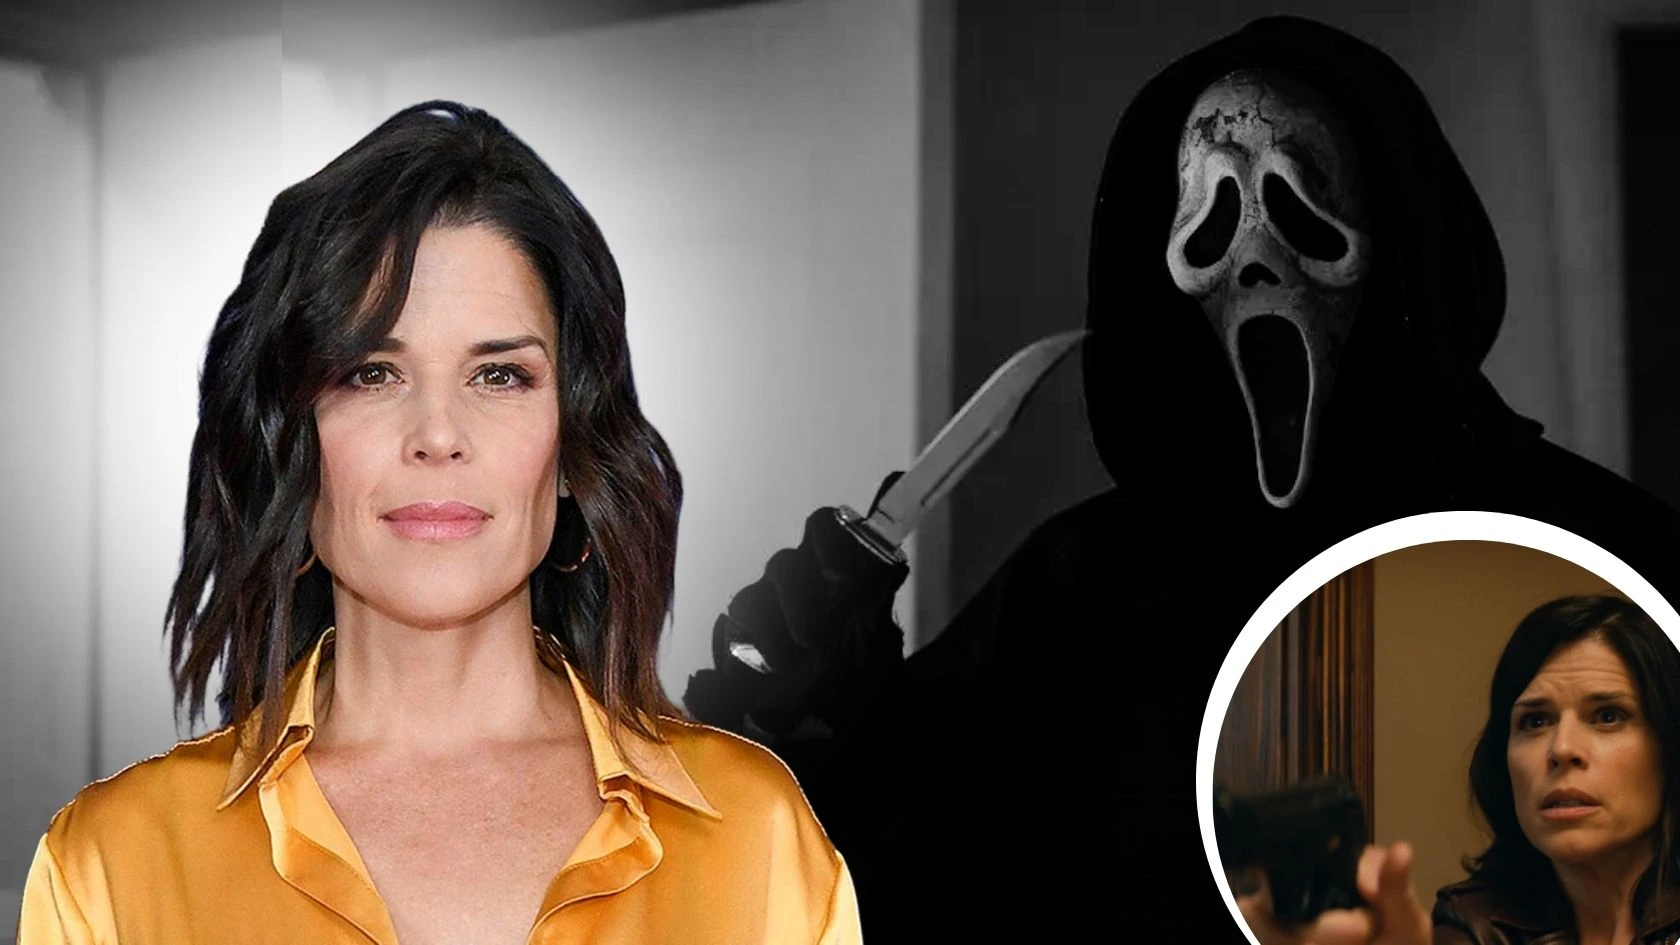 Scream 7 Gains New Life with Neve Campbell's Return and Kevin Williamson at the Helm